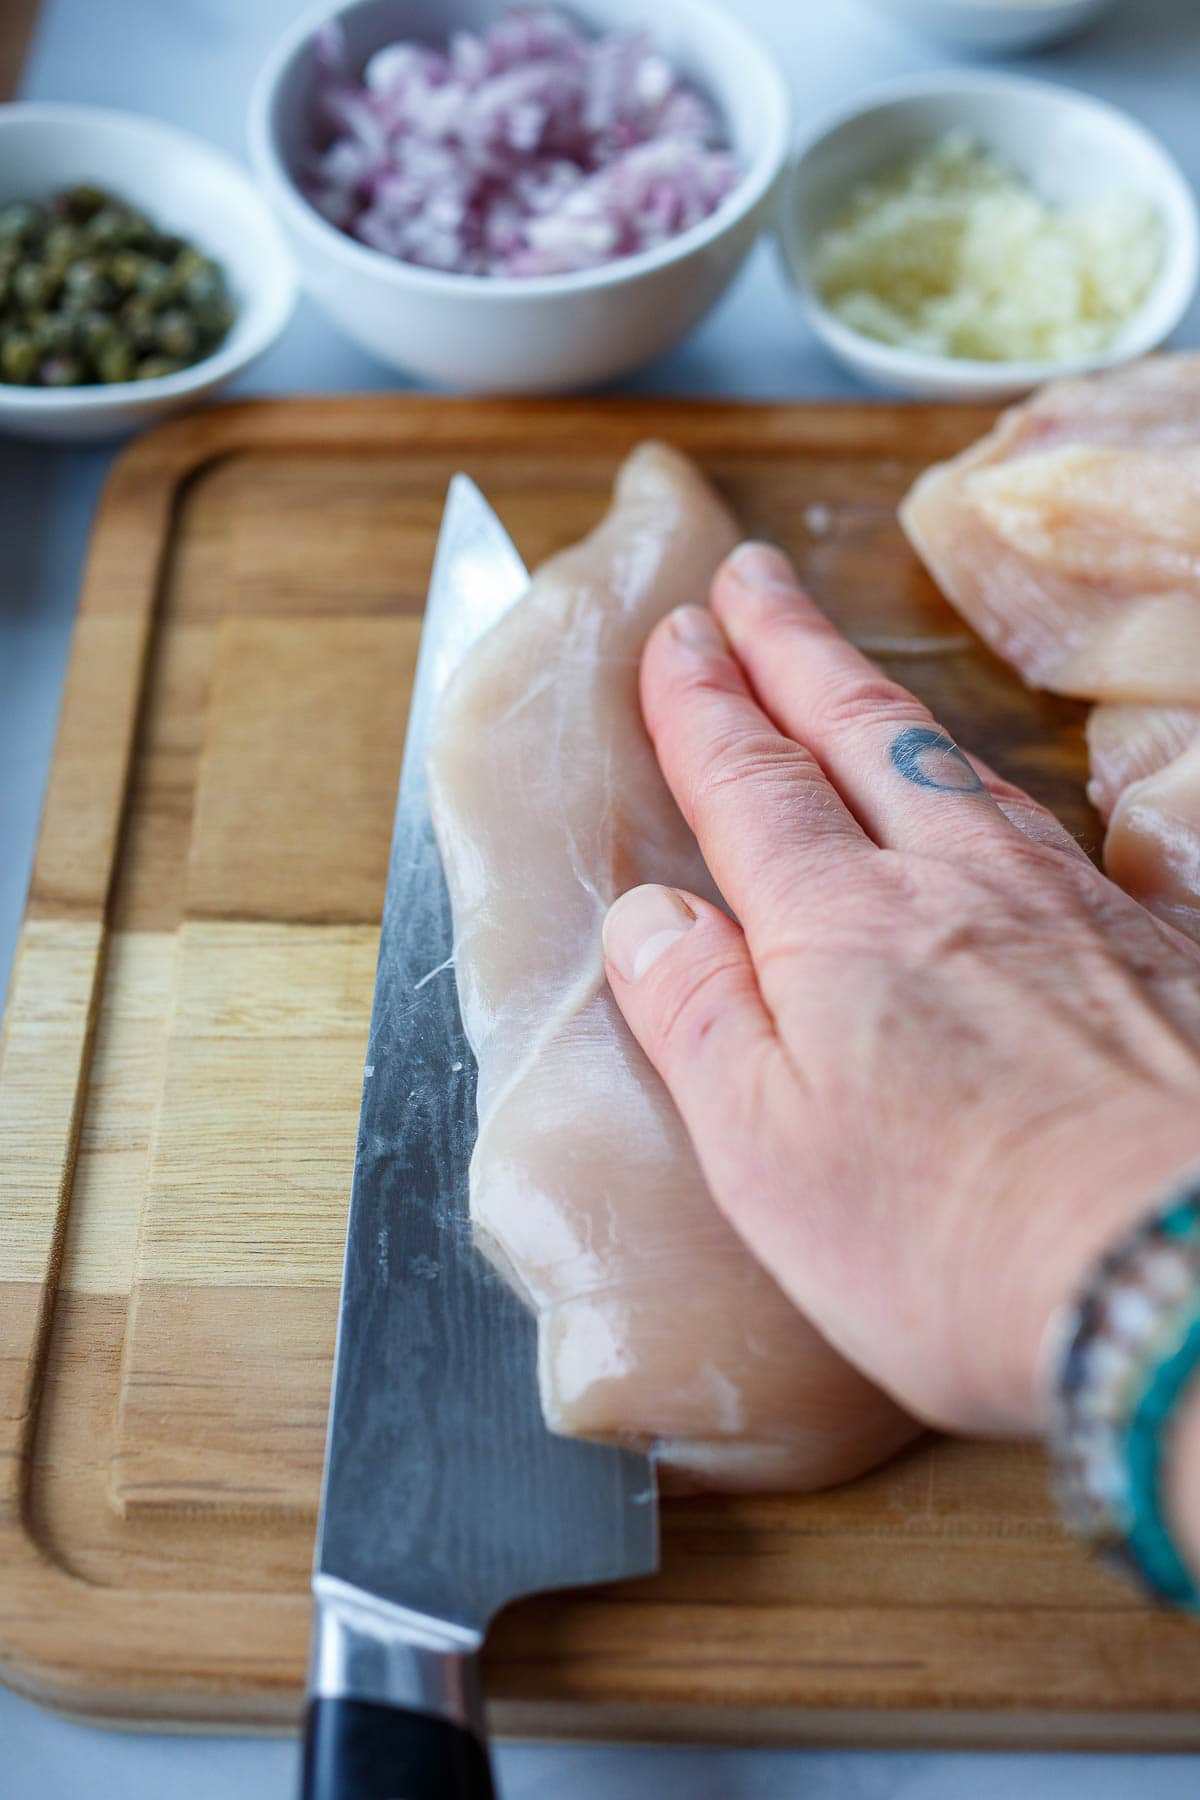 Slicing the chicken breast in half lengthwise on a wooden cutting board.  Bowls of capers, shallots and garlic.